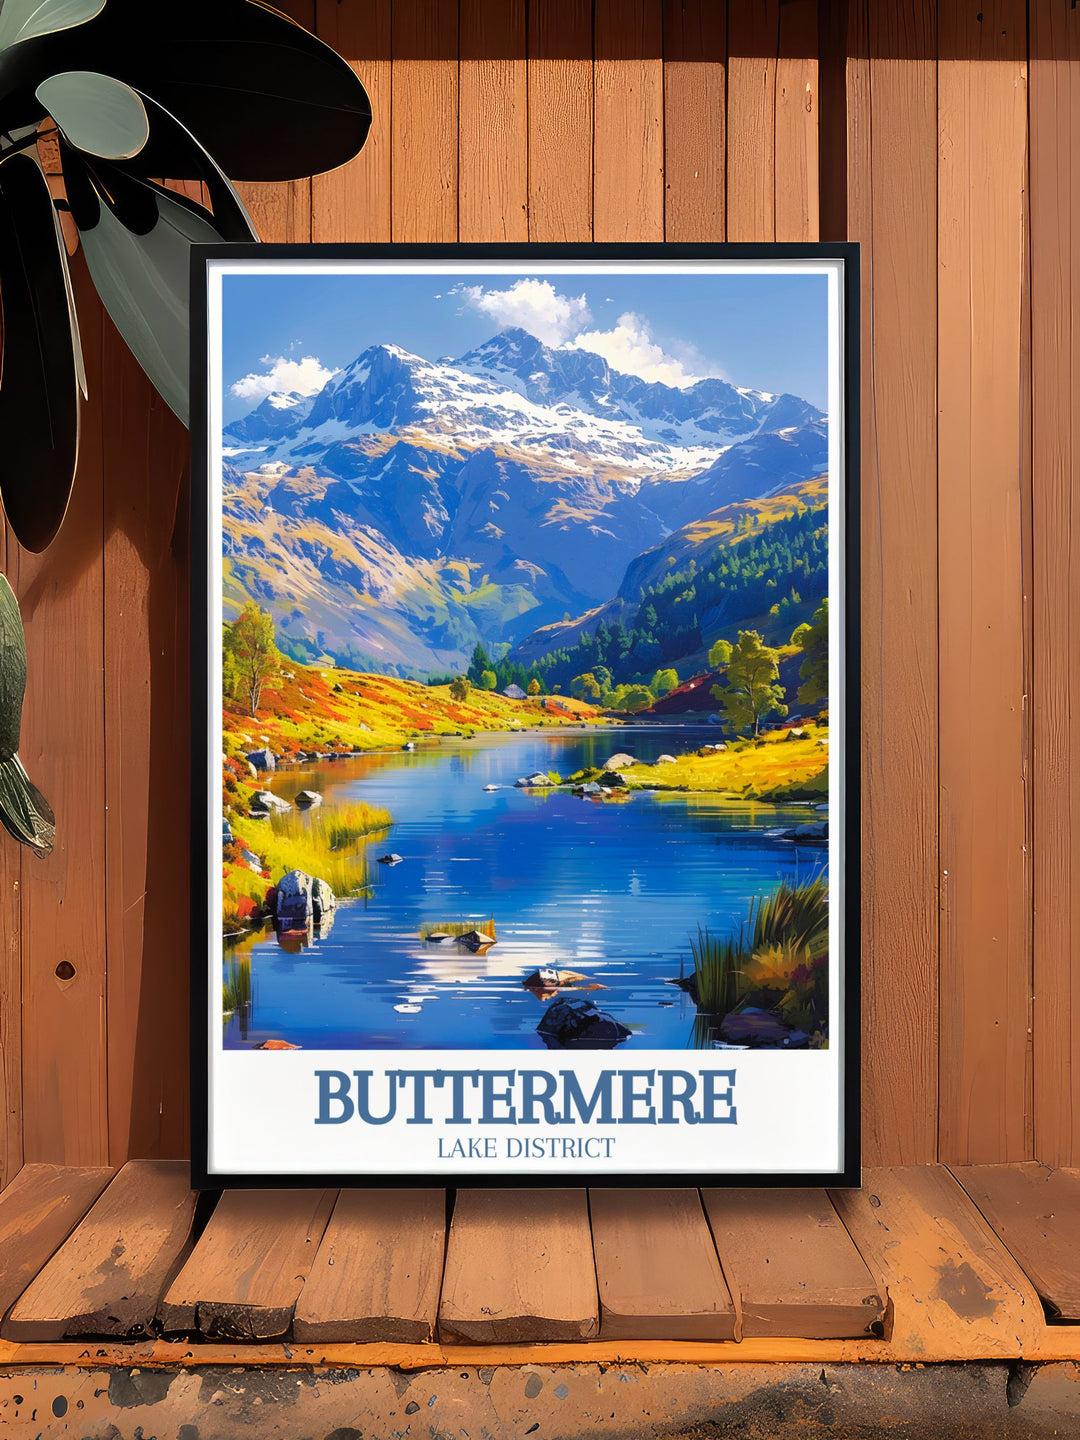 Buttermere Lakes tranquil waters and the rugged terrain of Haystacks are beautifully depicted in this art print, making it a versatile piece for any home decor.